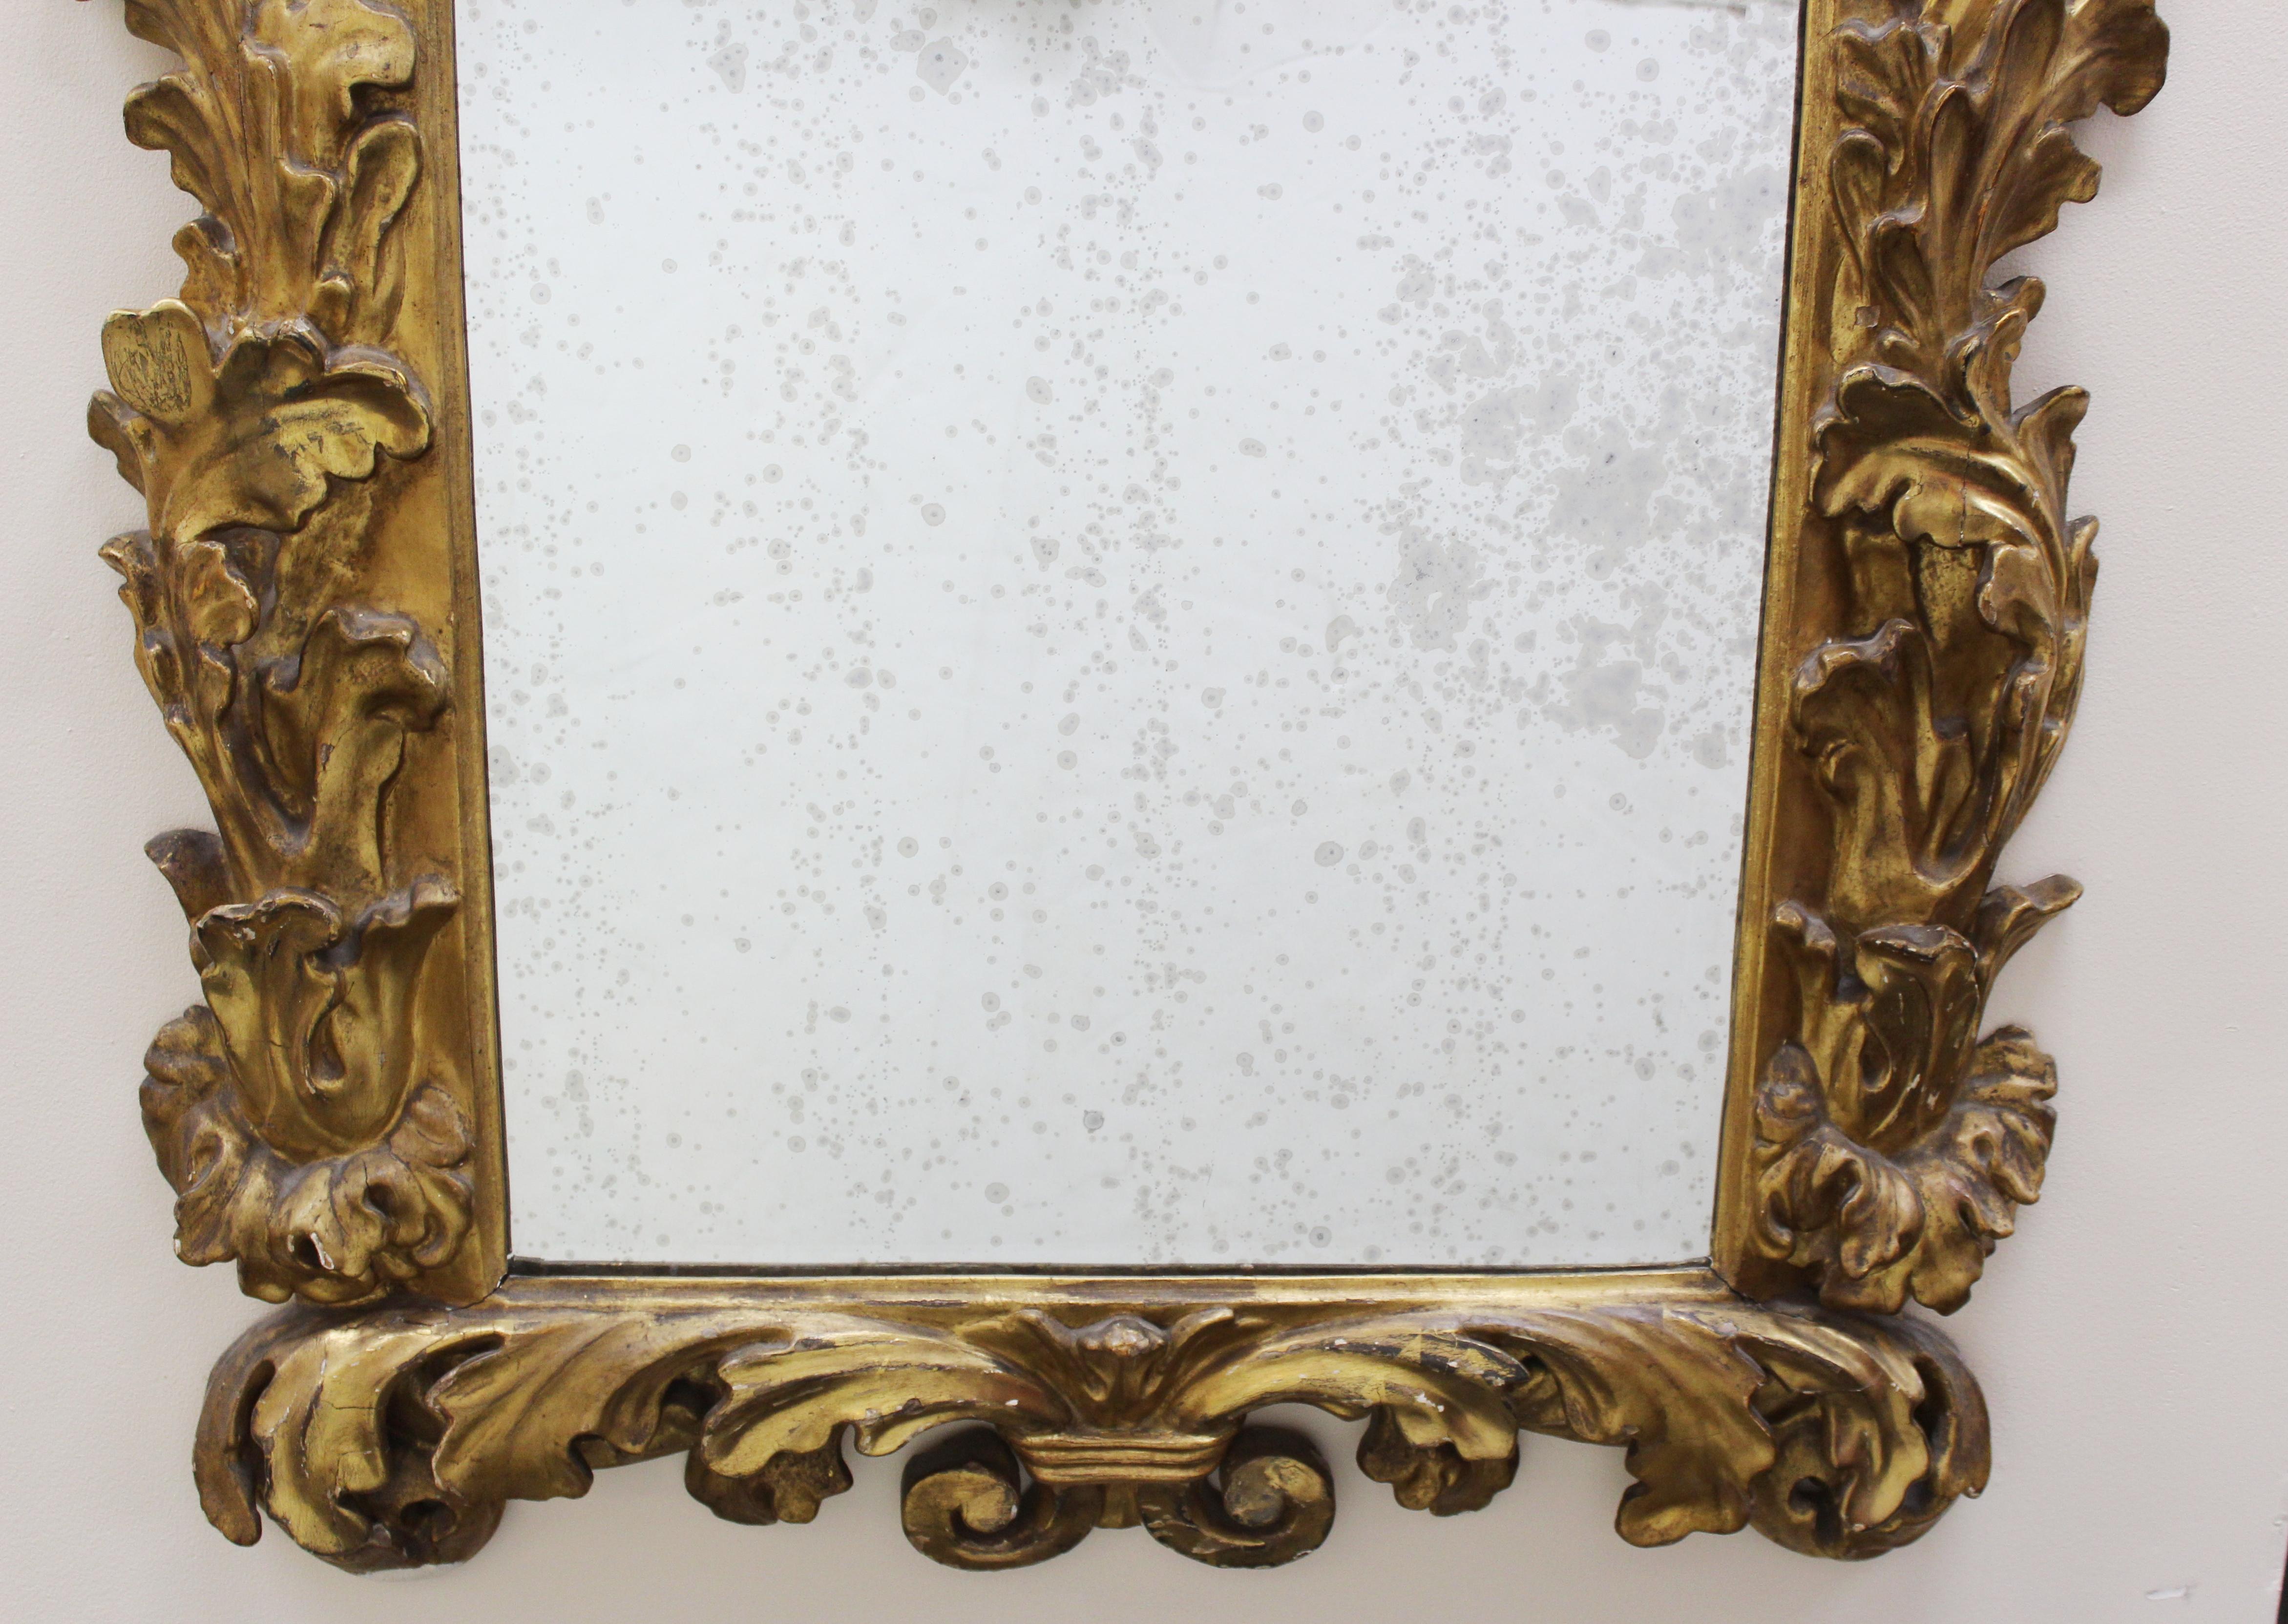 Italian Baroque Sculpted Giltwood Mirror with Acanthus Leaves Decor 2